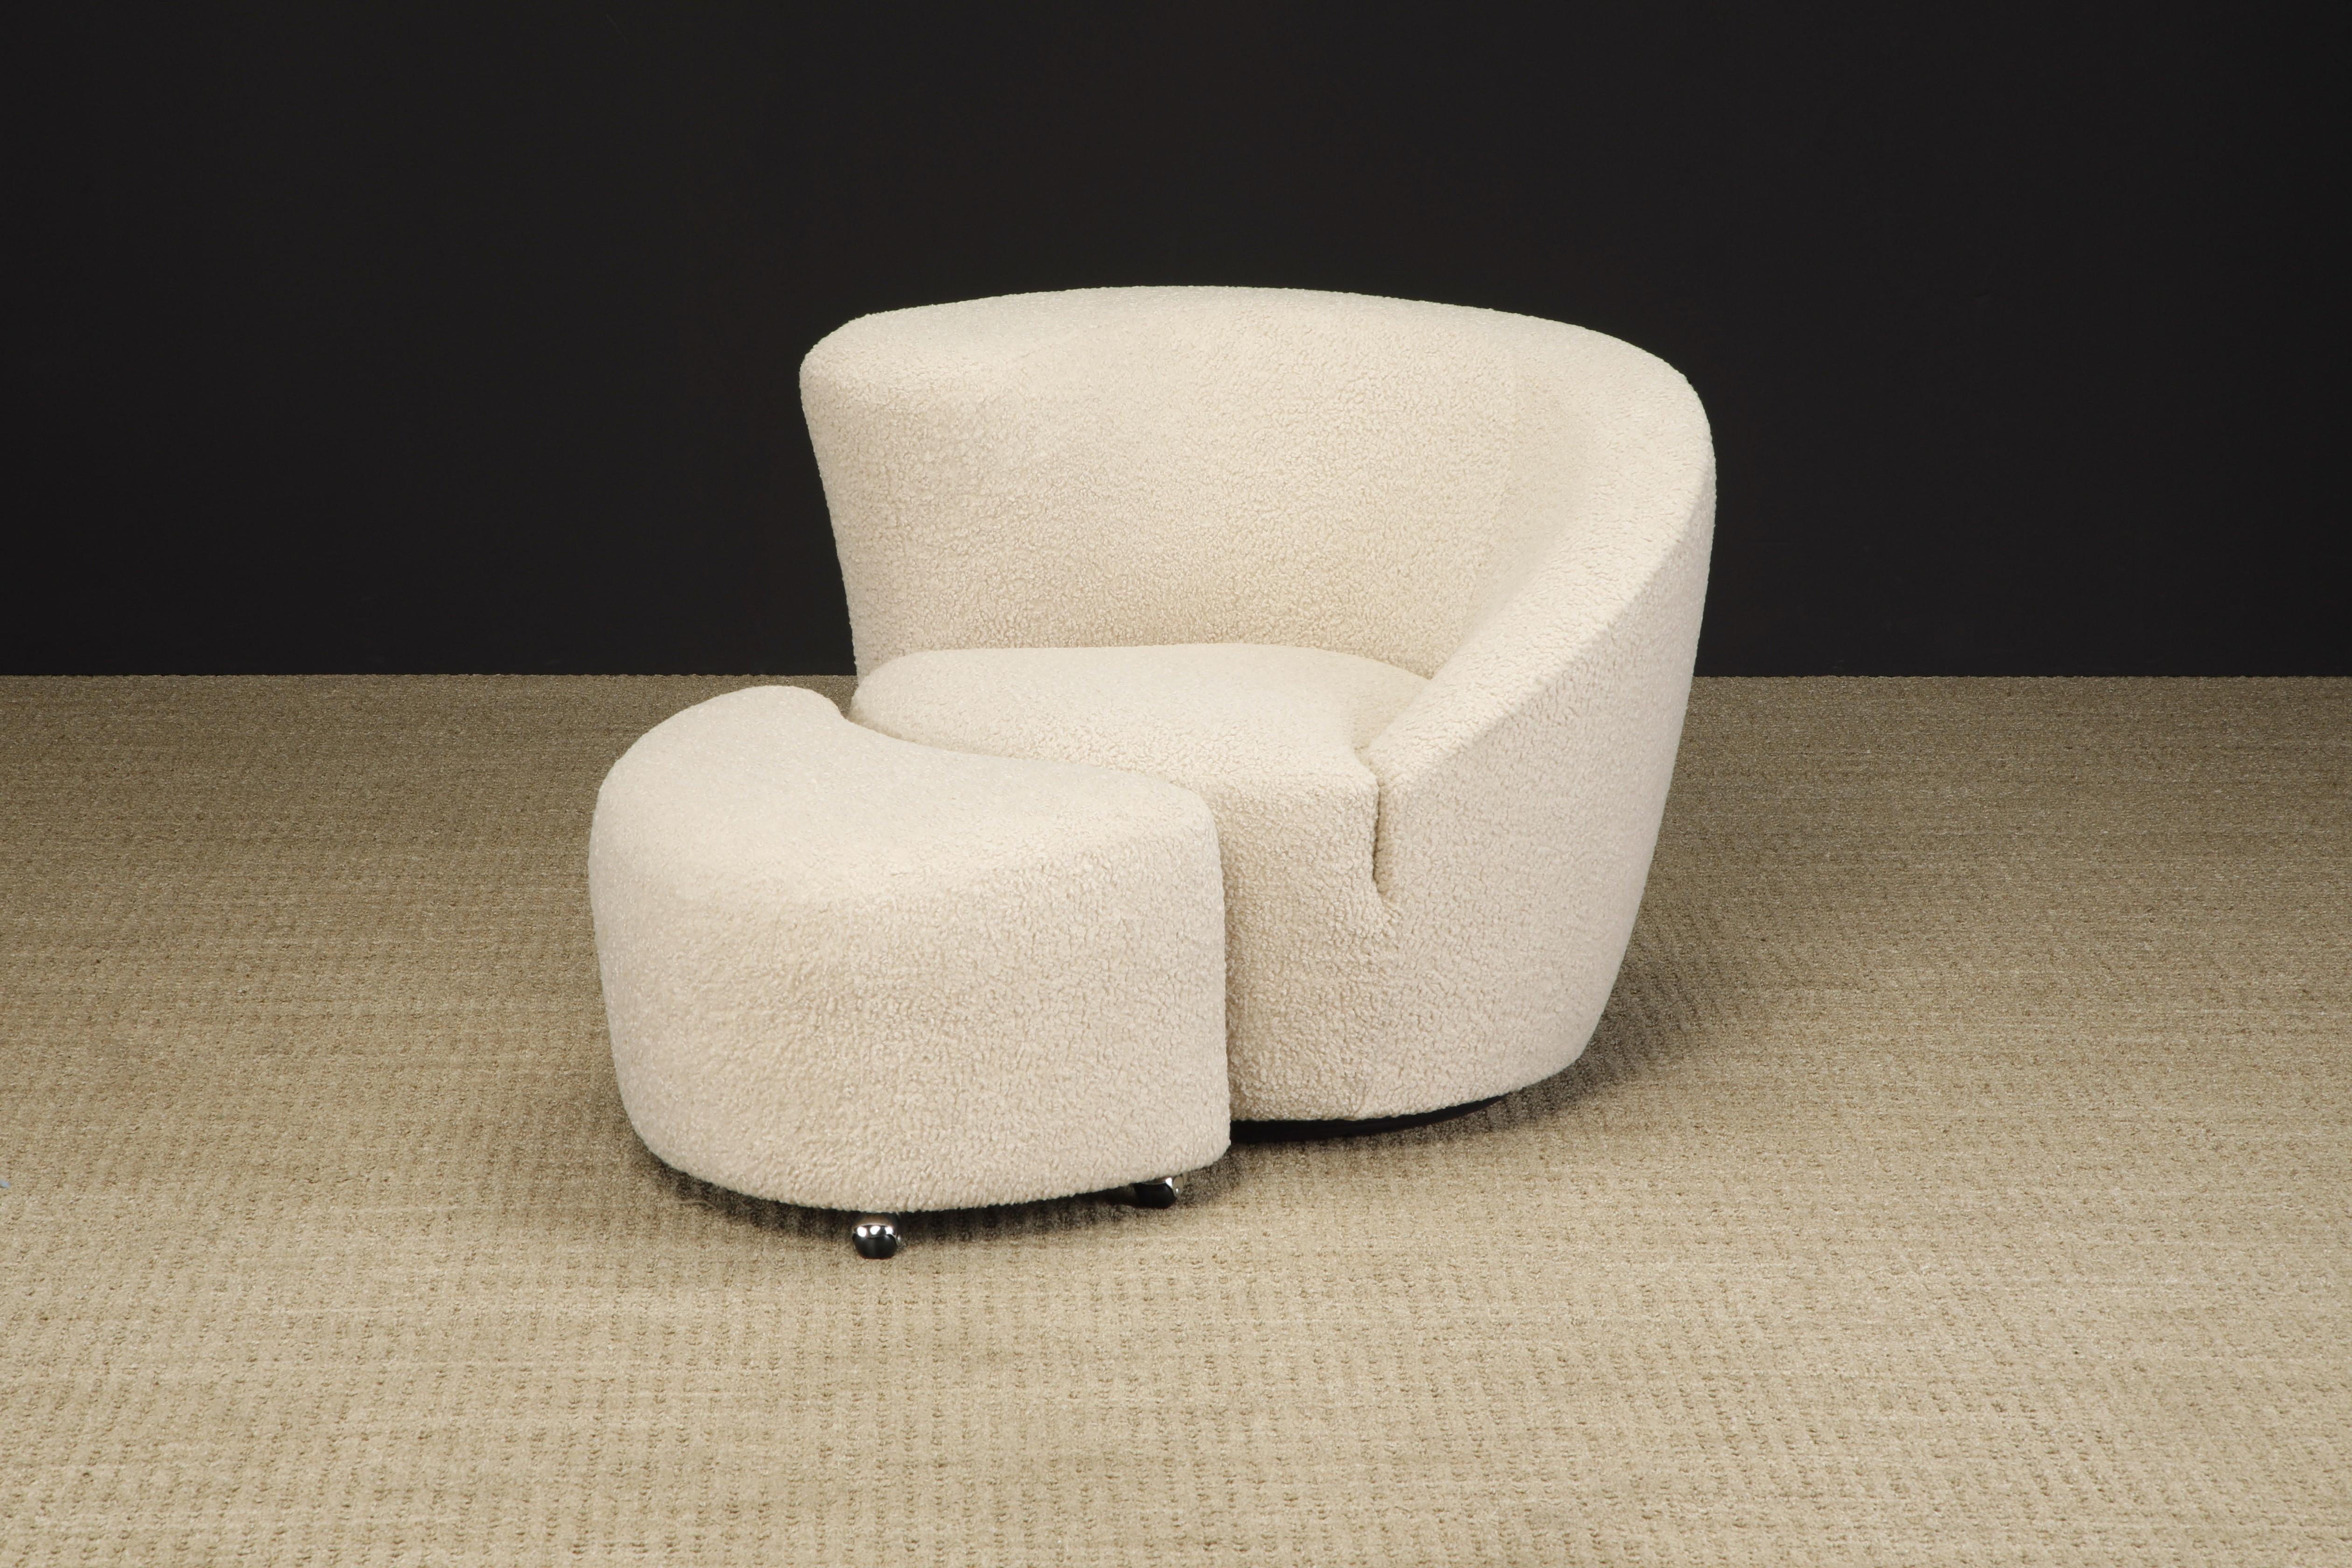 American 'Corkscrew' Chair & Ottoman by Vladimir Kagan for Directional in Bouclé, Signed